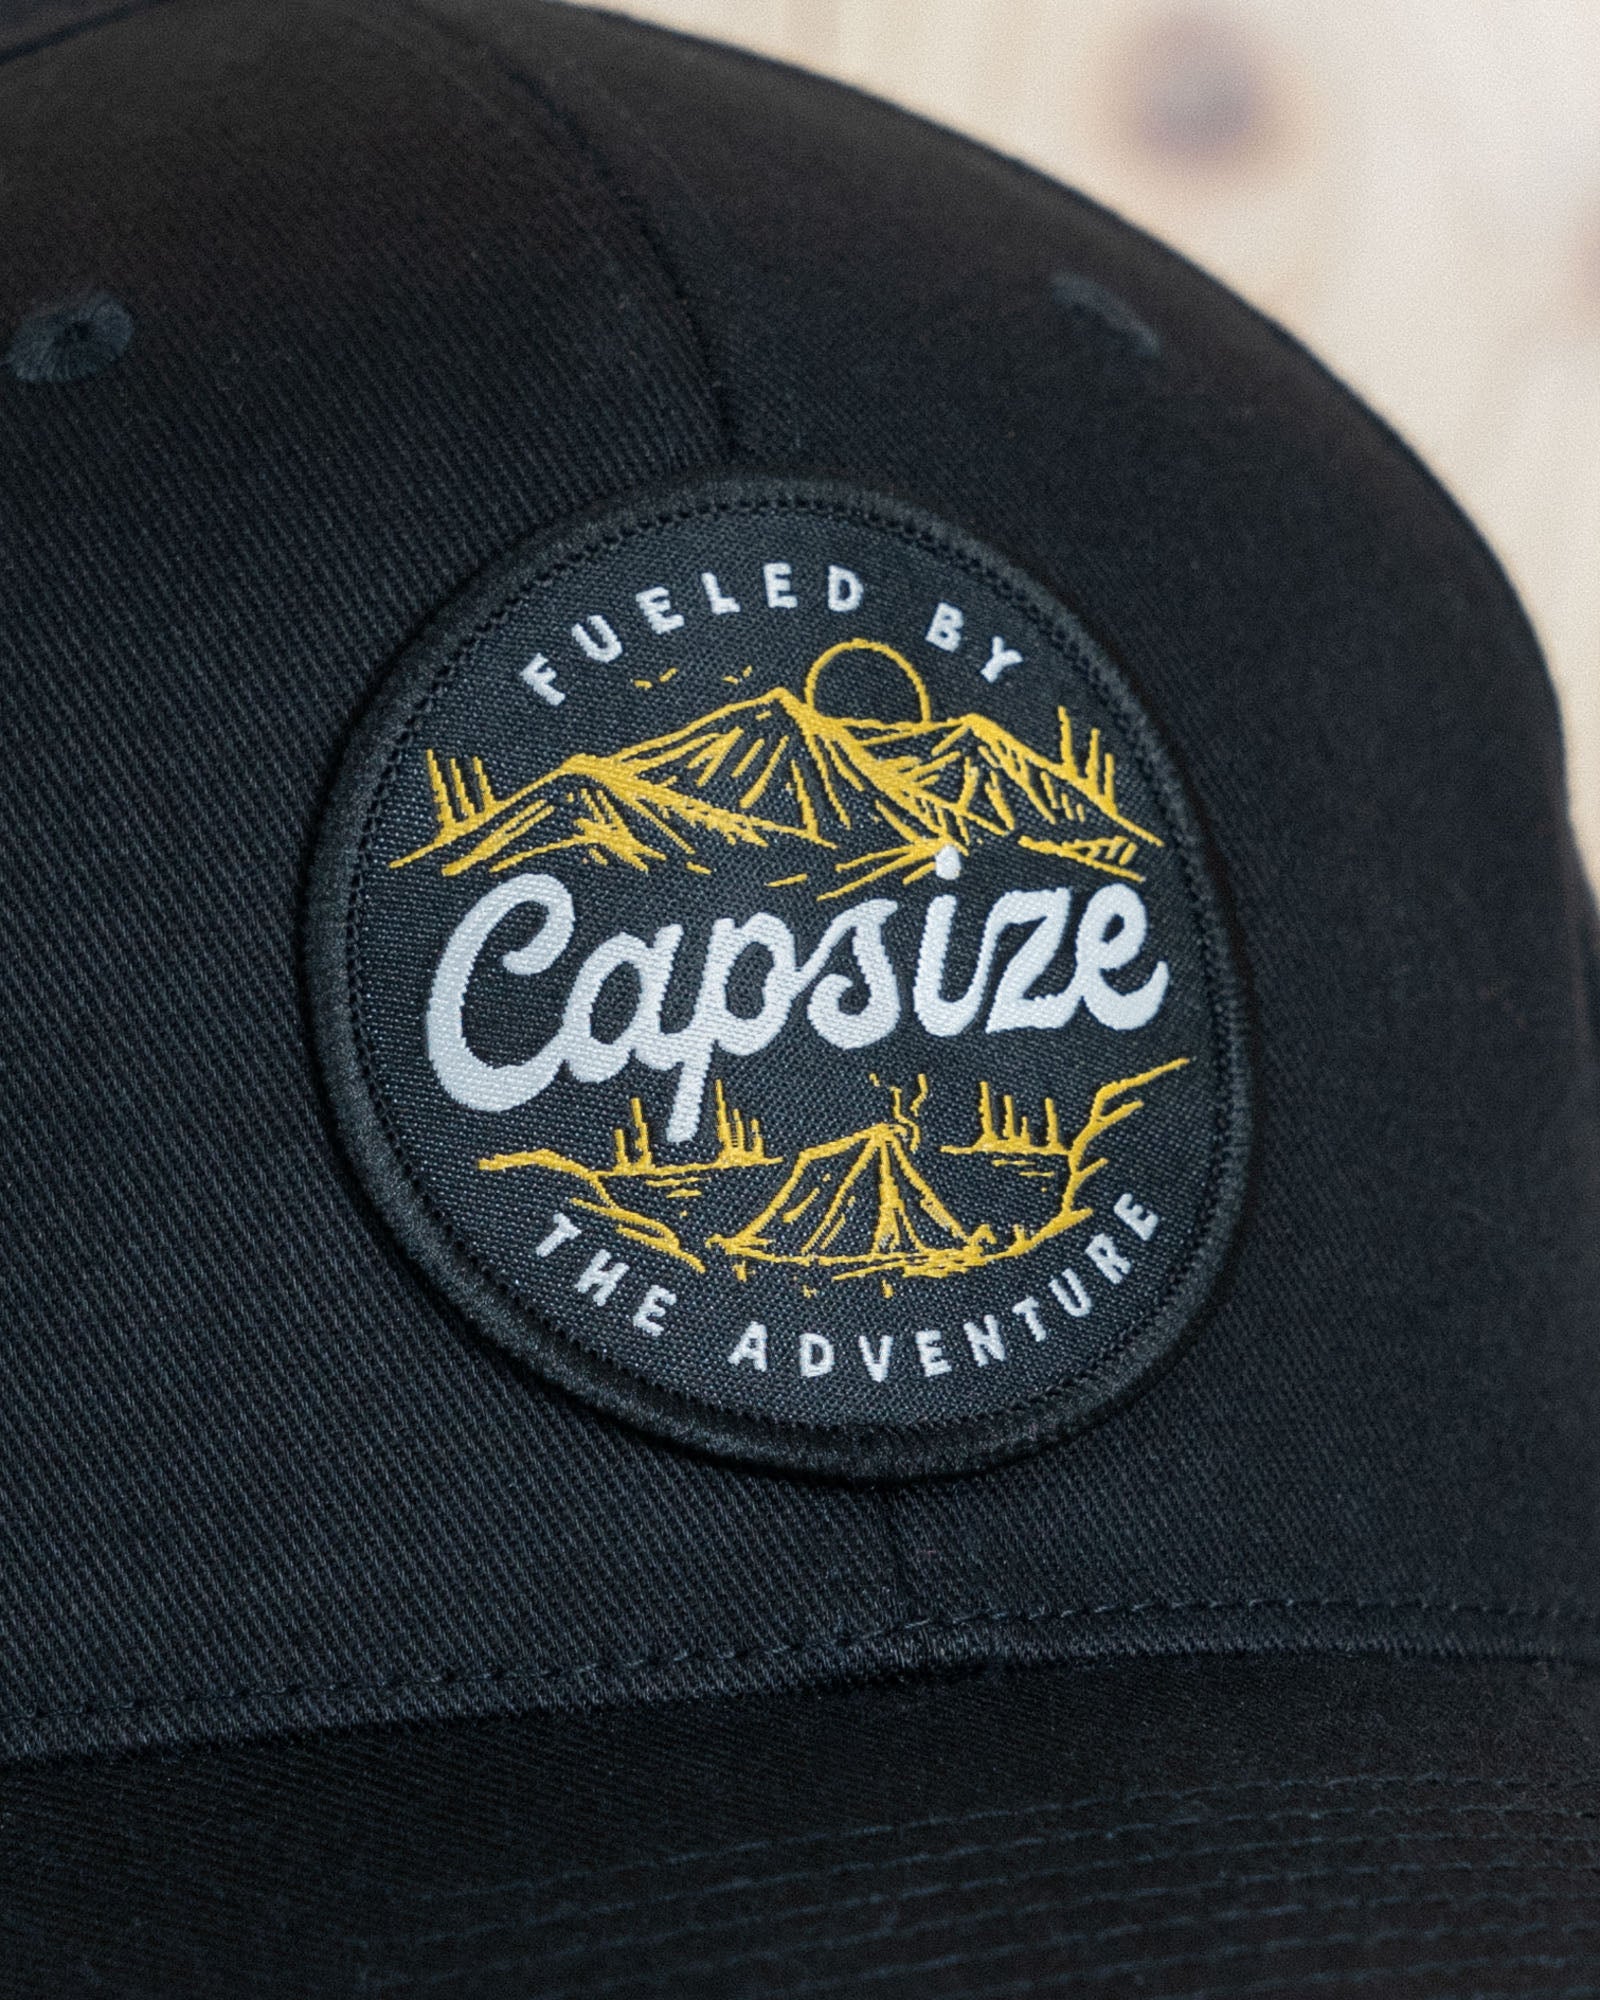 Fly Fishing Hat | The Fueled By The Adventure Flexfit - Capsize Fly Fishing